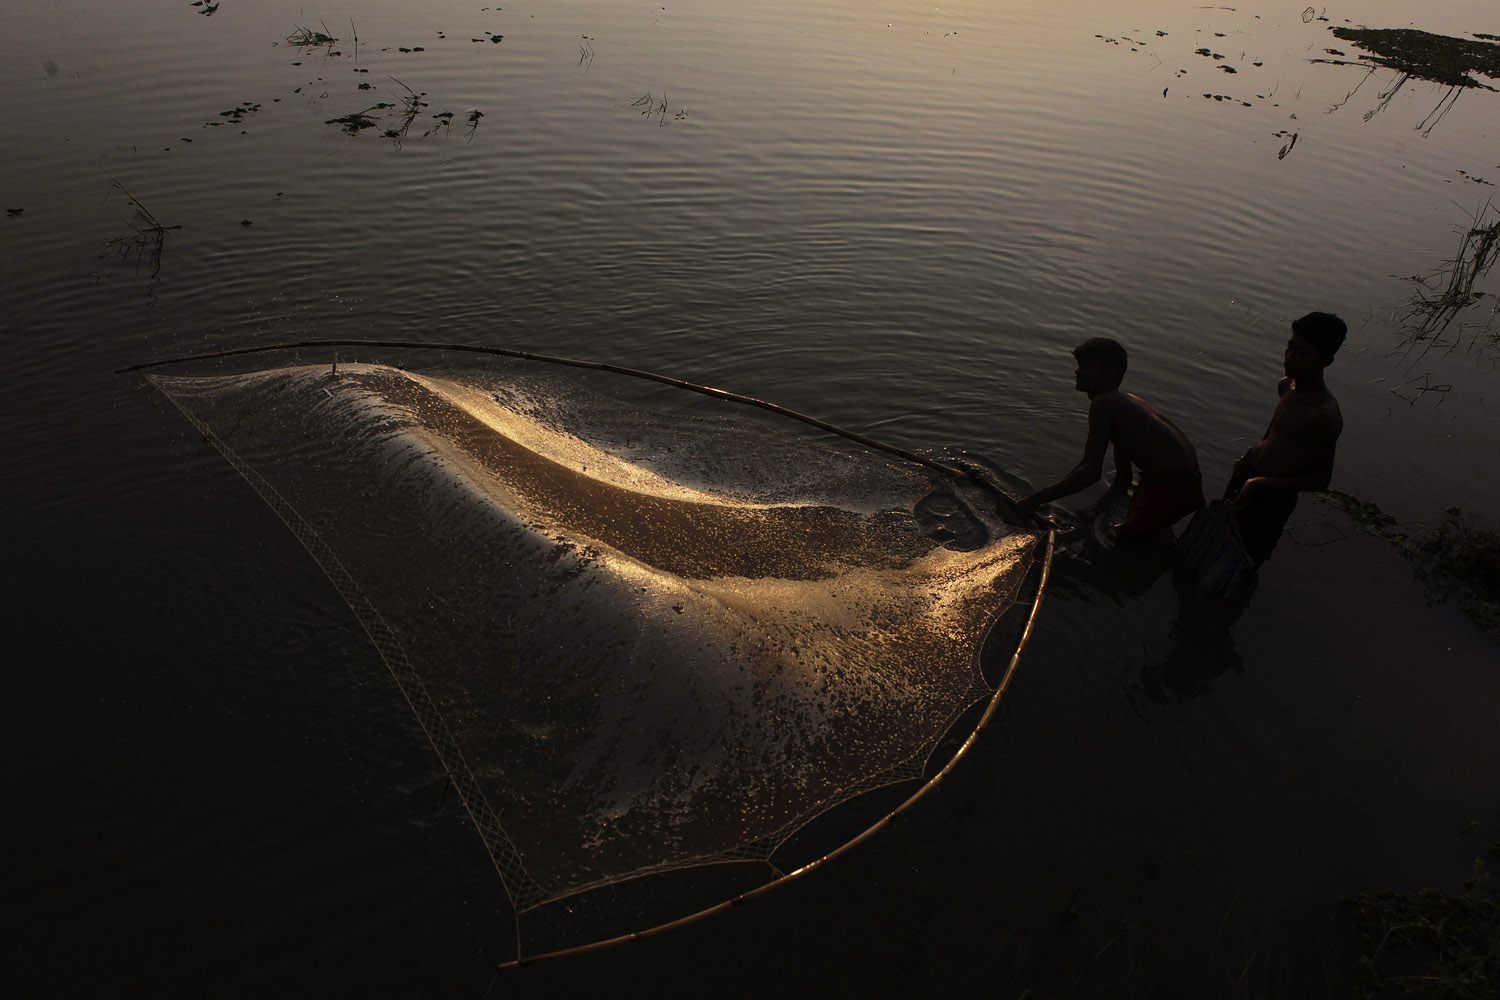 June 8, 2012. Indian fishermen throw their fishing net in floodwaters in a paddy field in Pobitora, India.